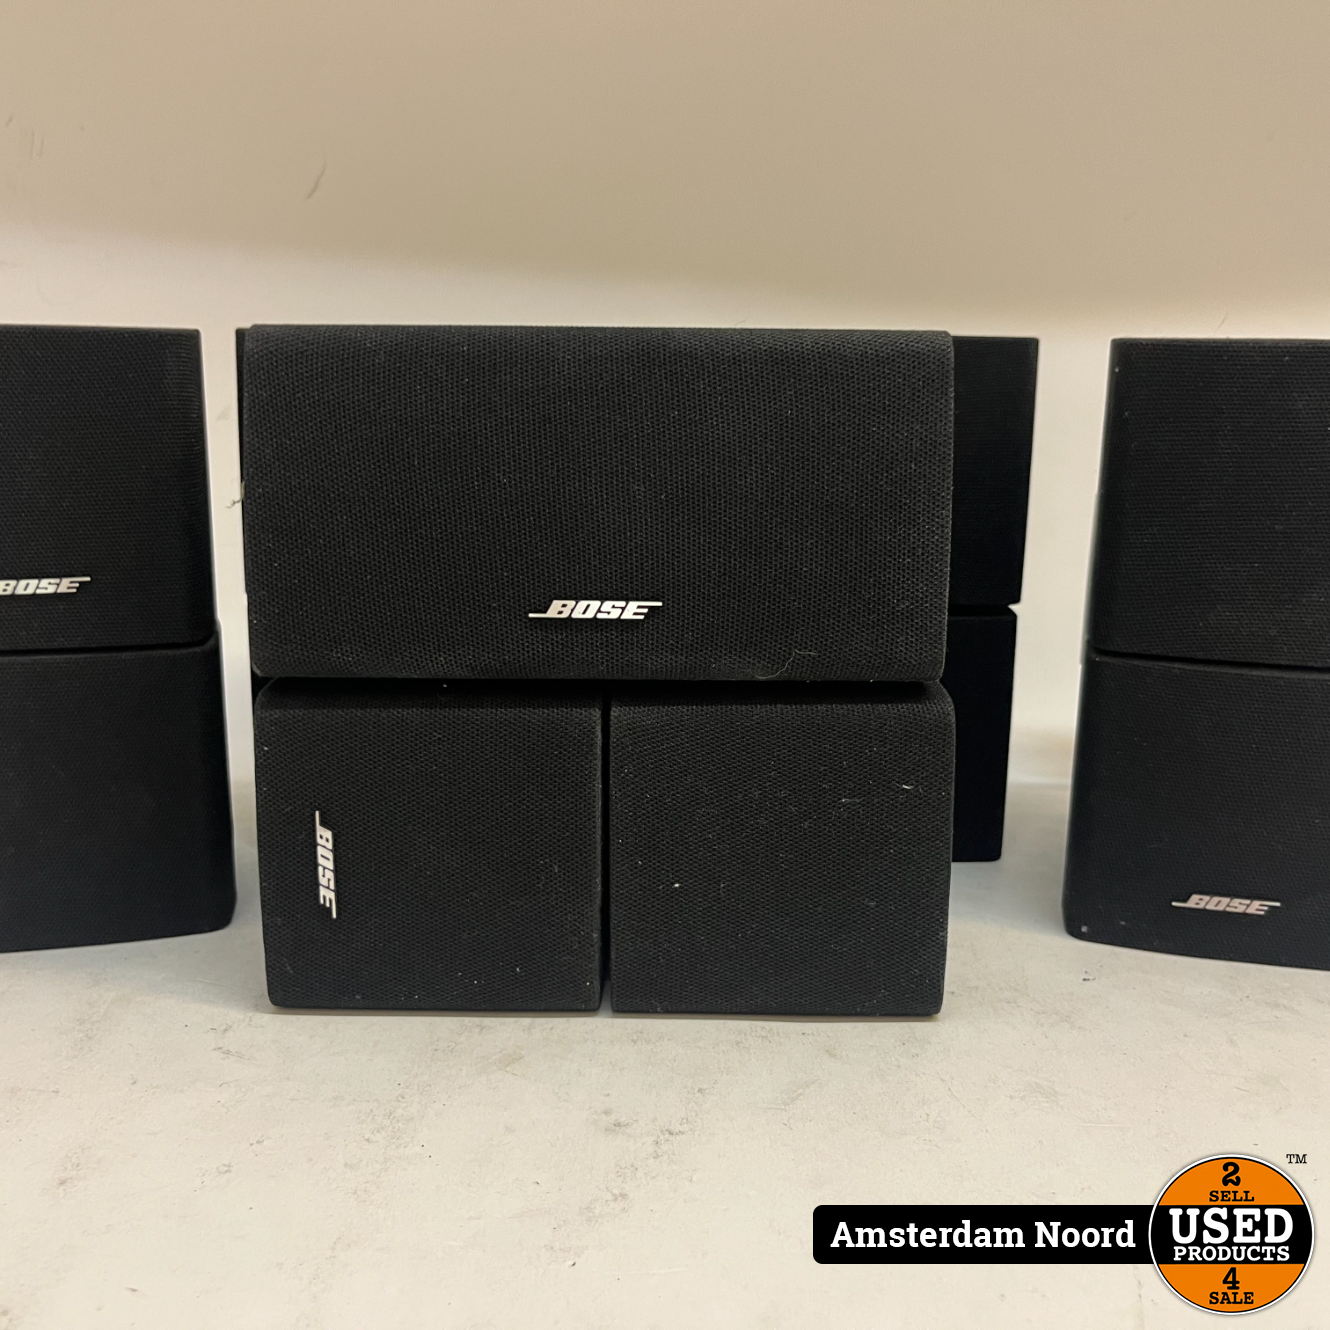 Fragiel gezagvoerder Experiment Bose Lifestyle V10 - Home Cinema Set - Used Products Amsterdam Noord